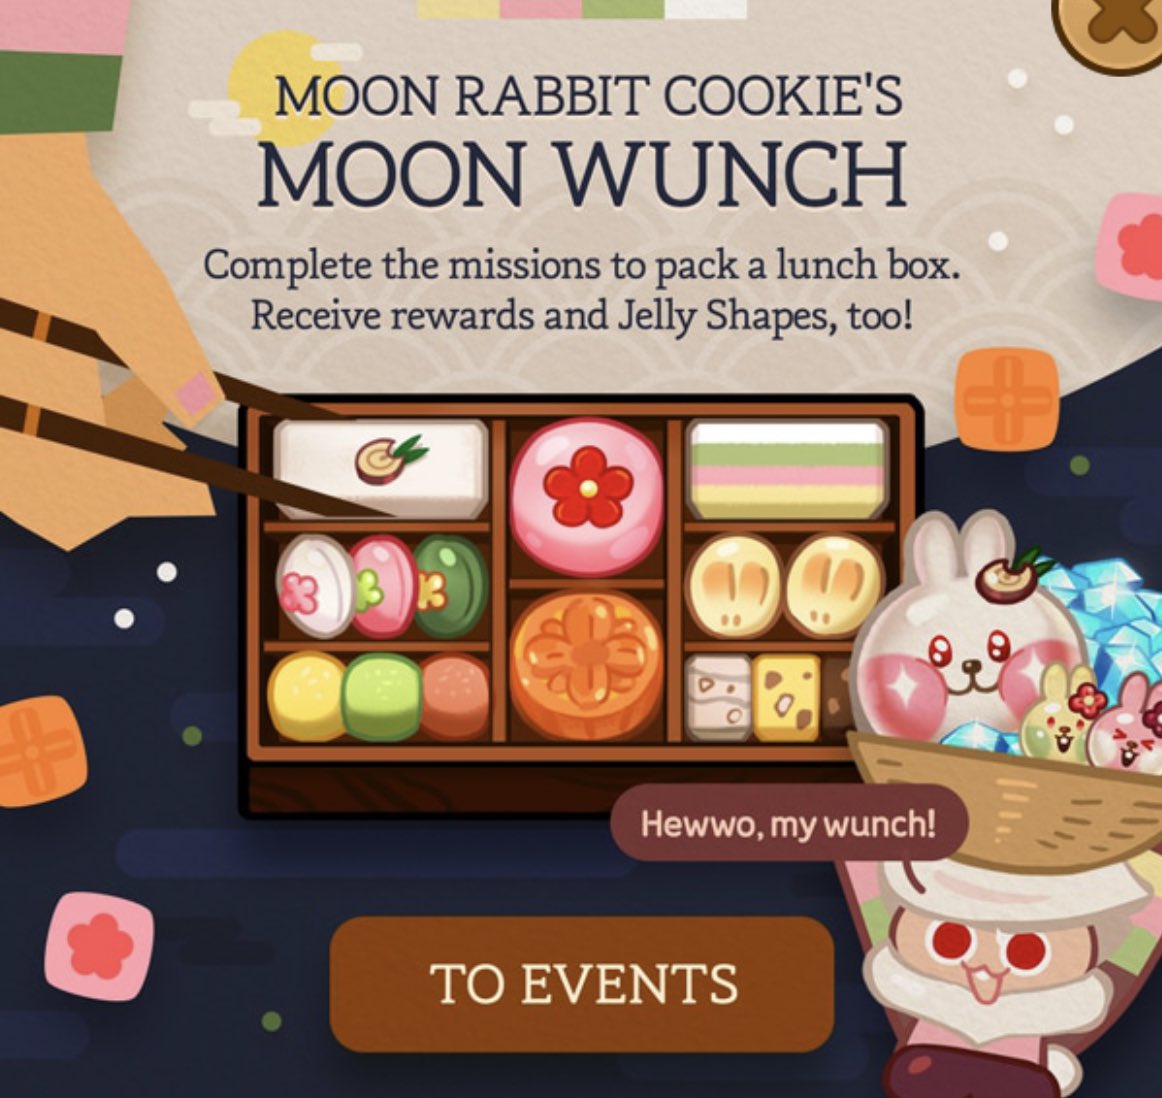 Moon rabbit cookie toppings